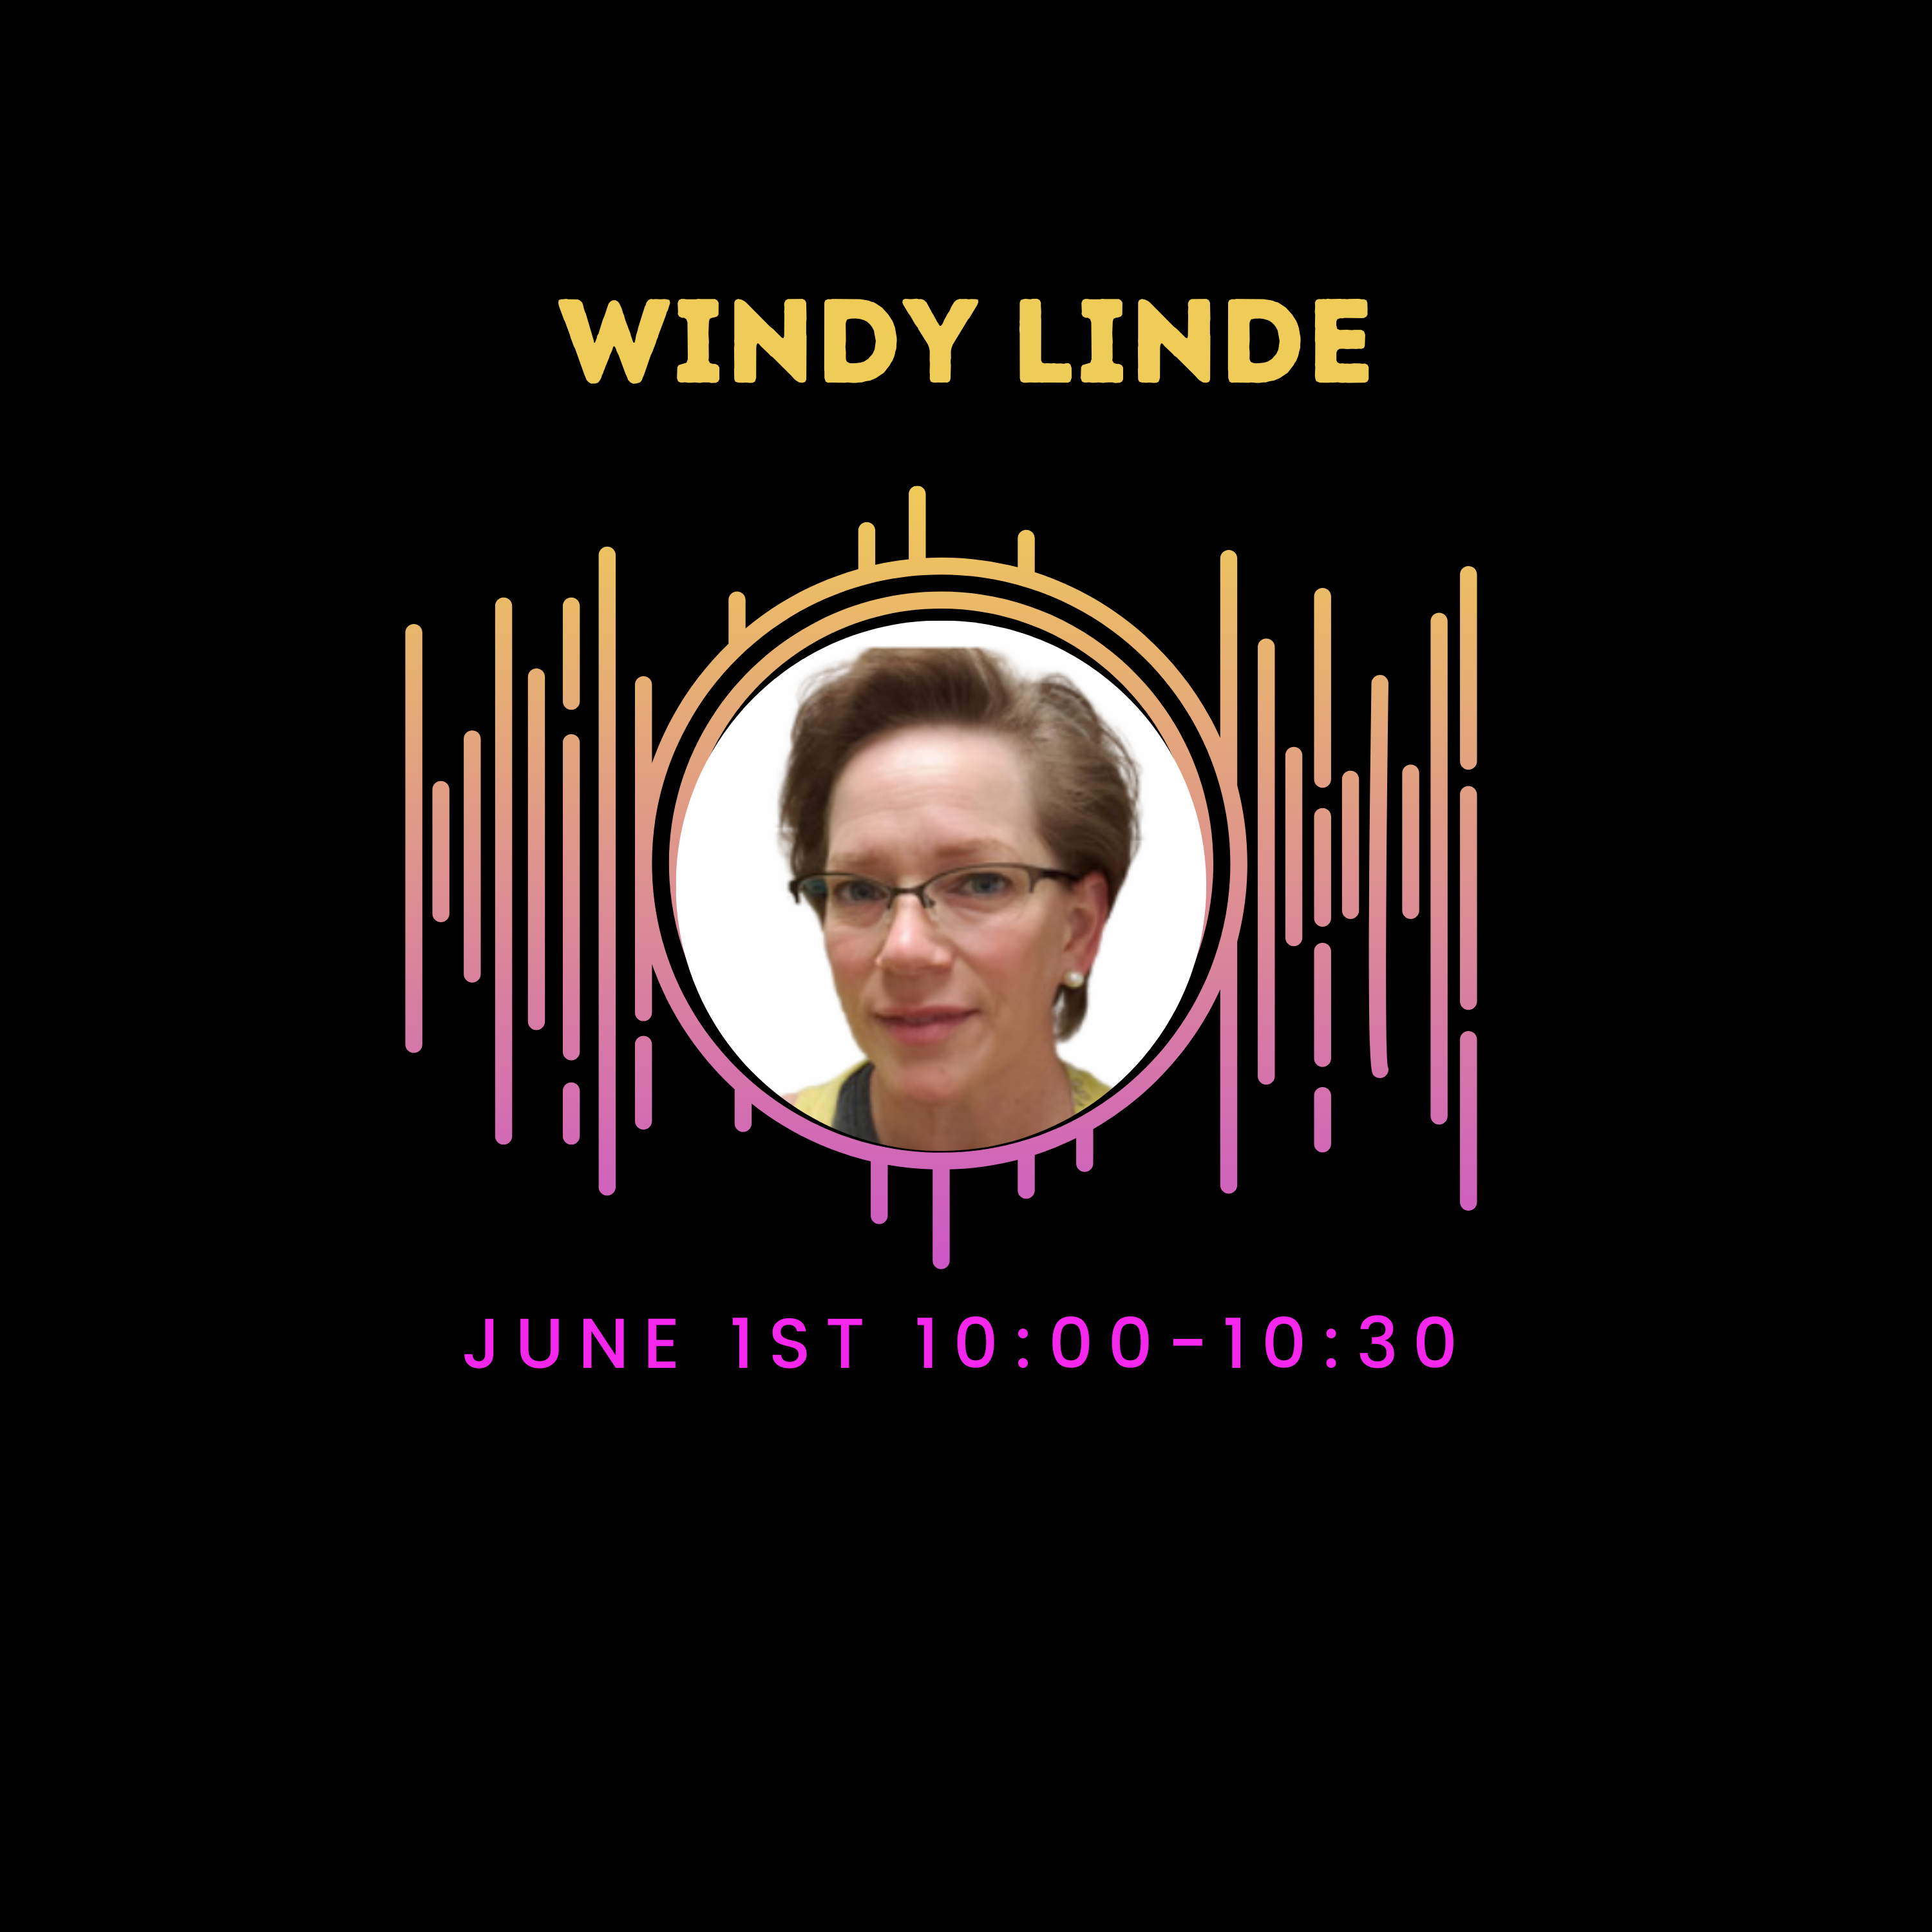 Promotional graphic for the Reflect Live Podcast featuring a portrait of Windy Linde encircled by a pink and orange waveform graphic. Above her photo, the text reads 'WINDY LINDE' in bold yellow letters. The date and time of her podcast appearance, 'JUNE 1ST 10:00–10:30AM', are displayed below her image, against a black background. This image is used to advertise an upcoming interview segment with Windy Linde on the podcast